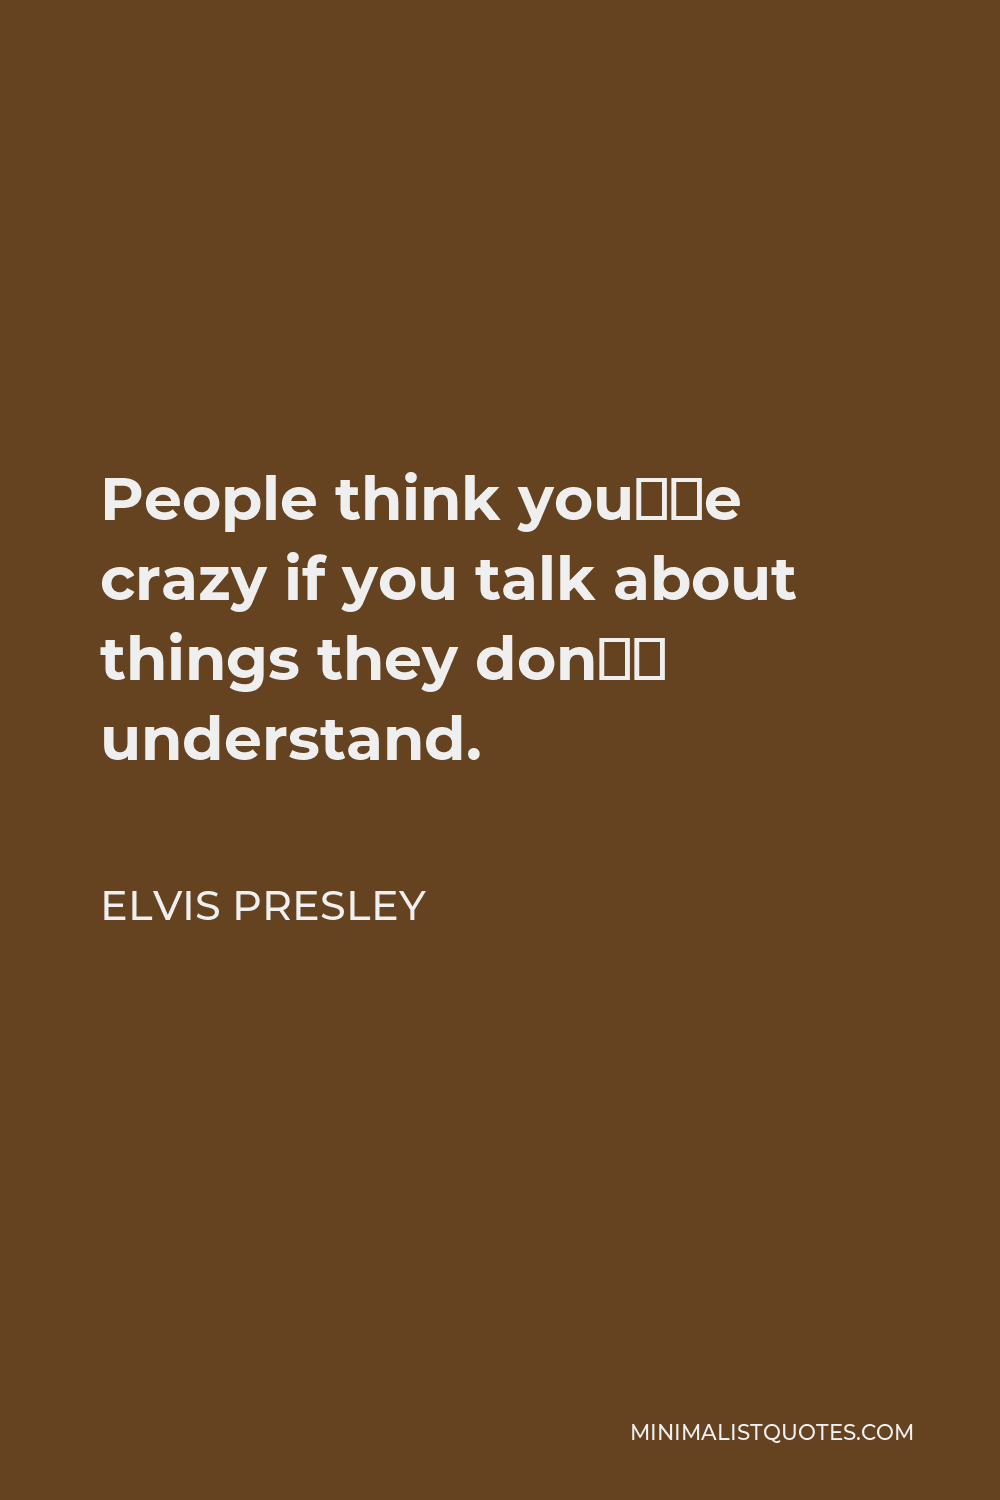 Elvis Presley Quote - People think you’re crazy if you talk about things they don’t understand.